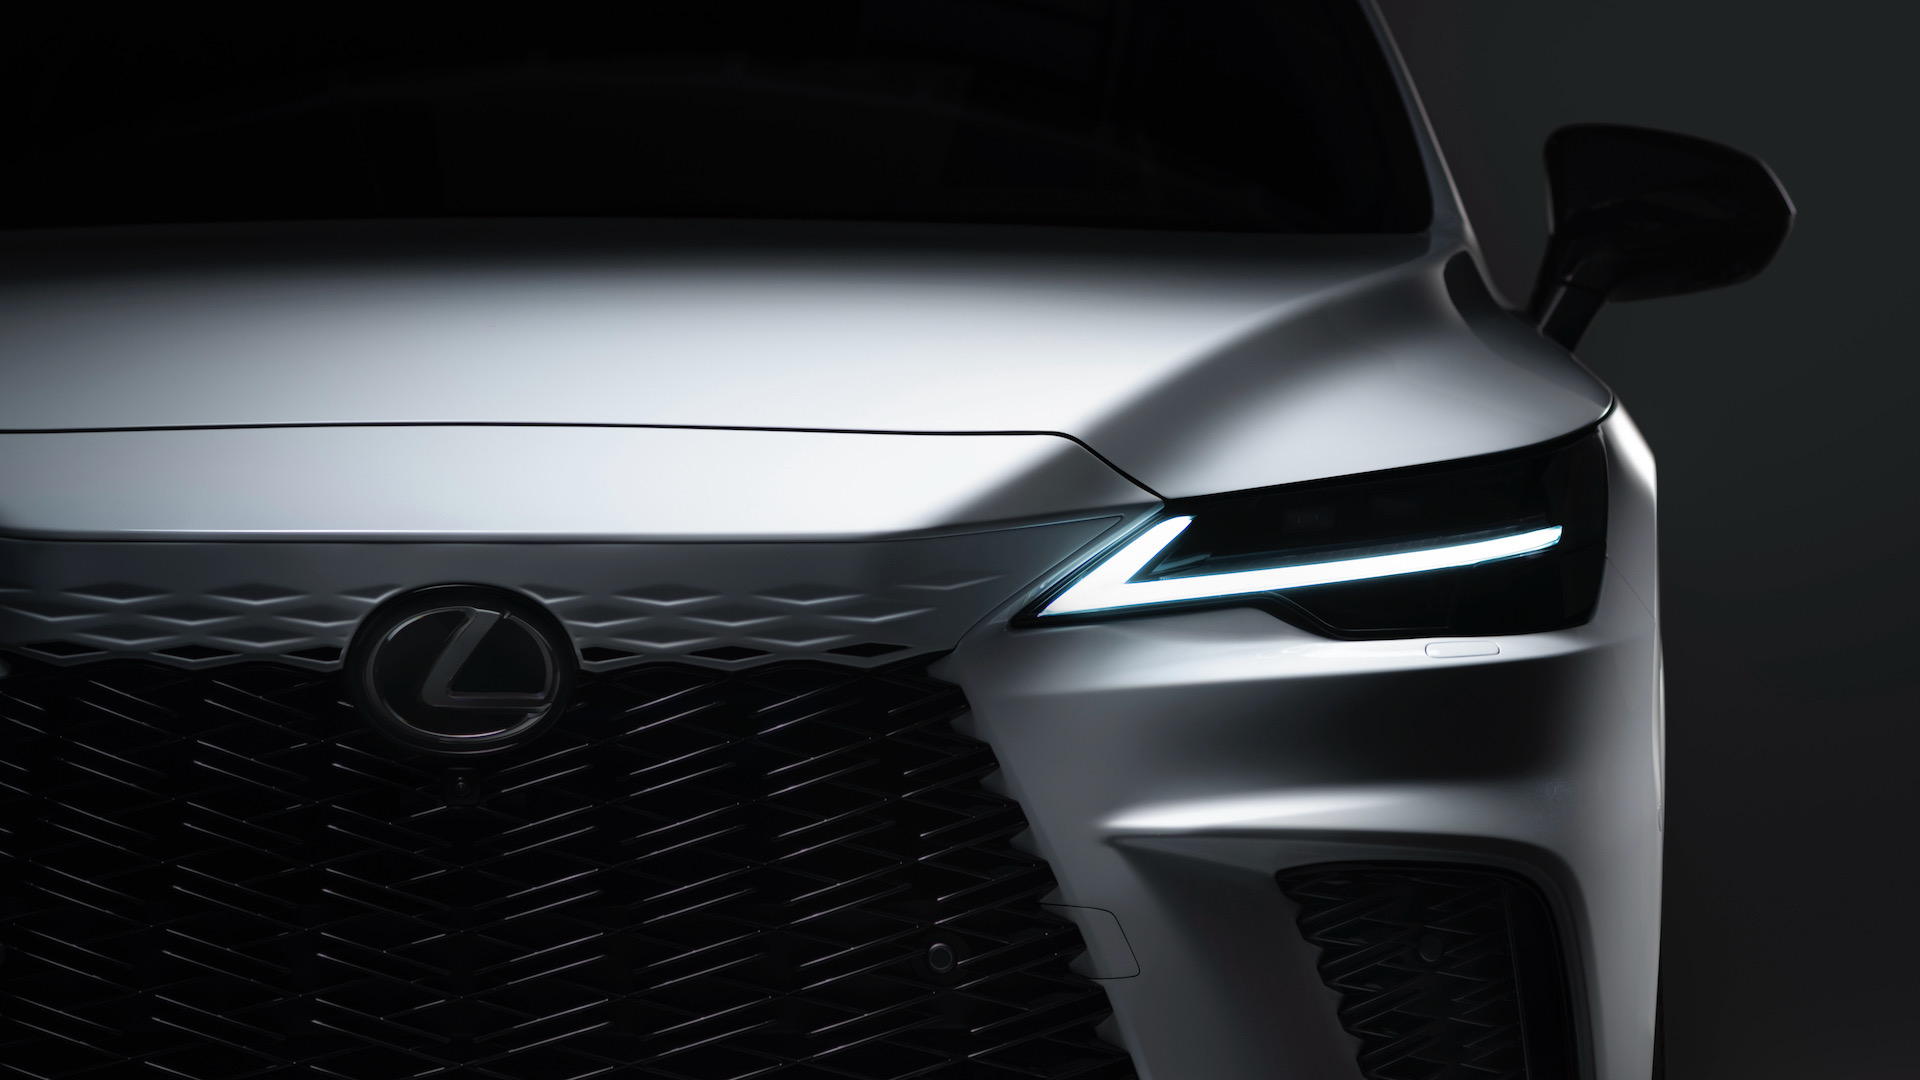 Next-gen 2023 Lexus RX large SUV previewed, 2.4 turbo and PHEV expected